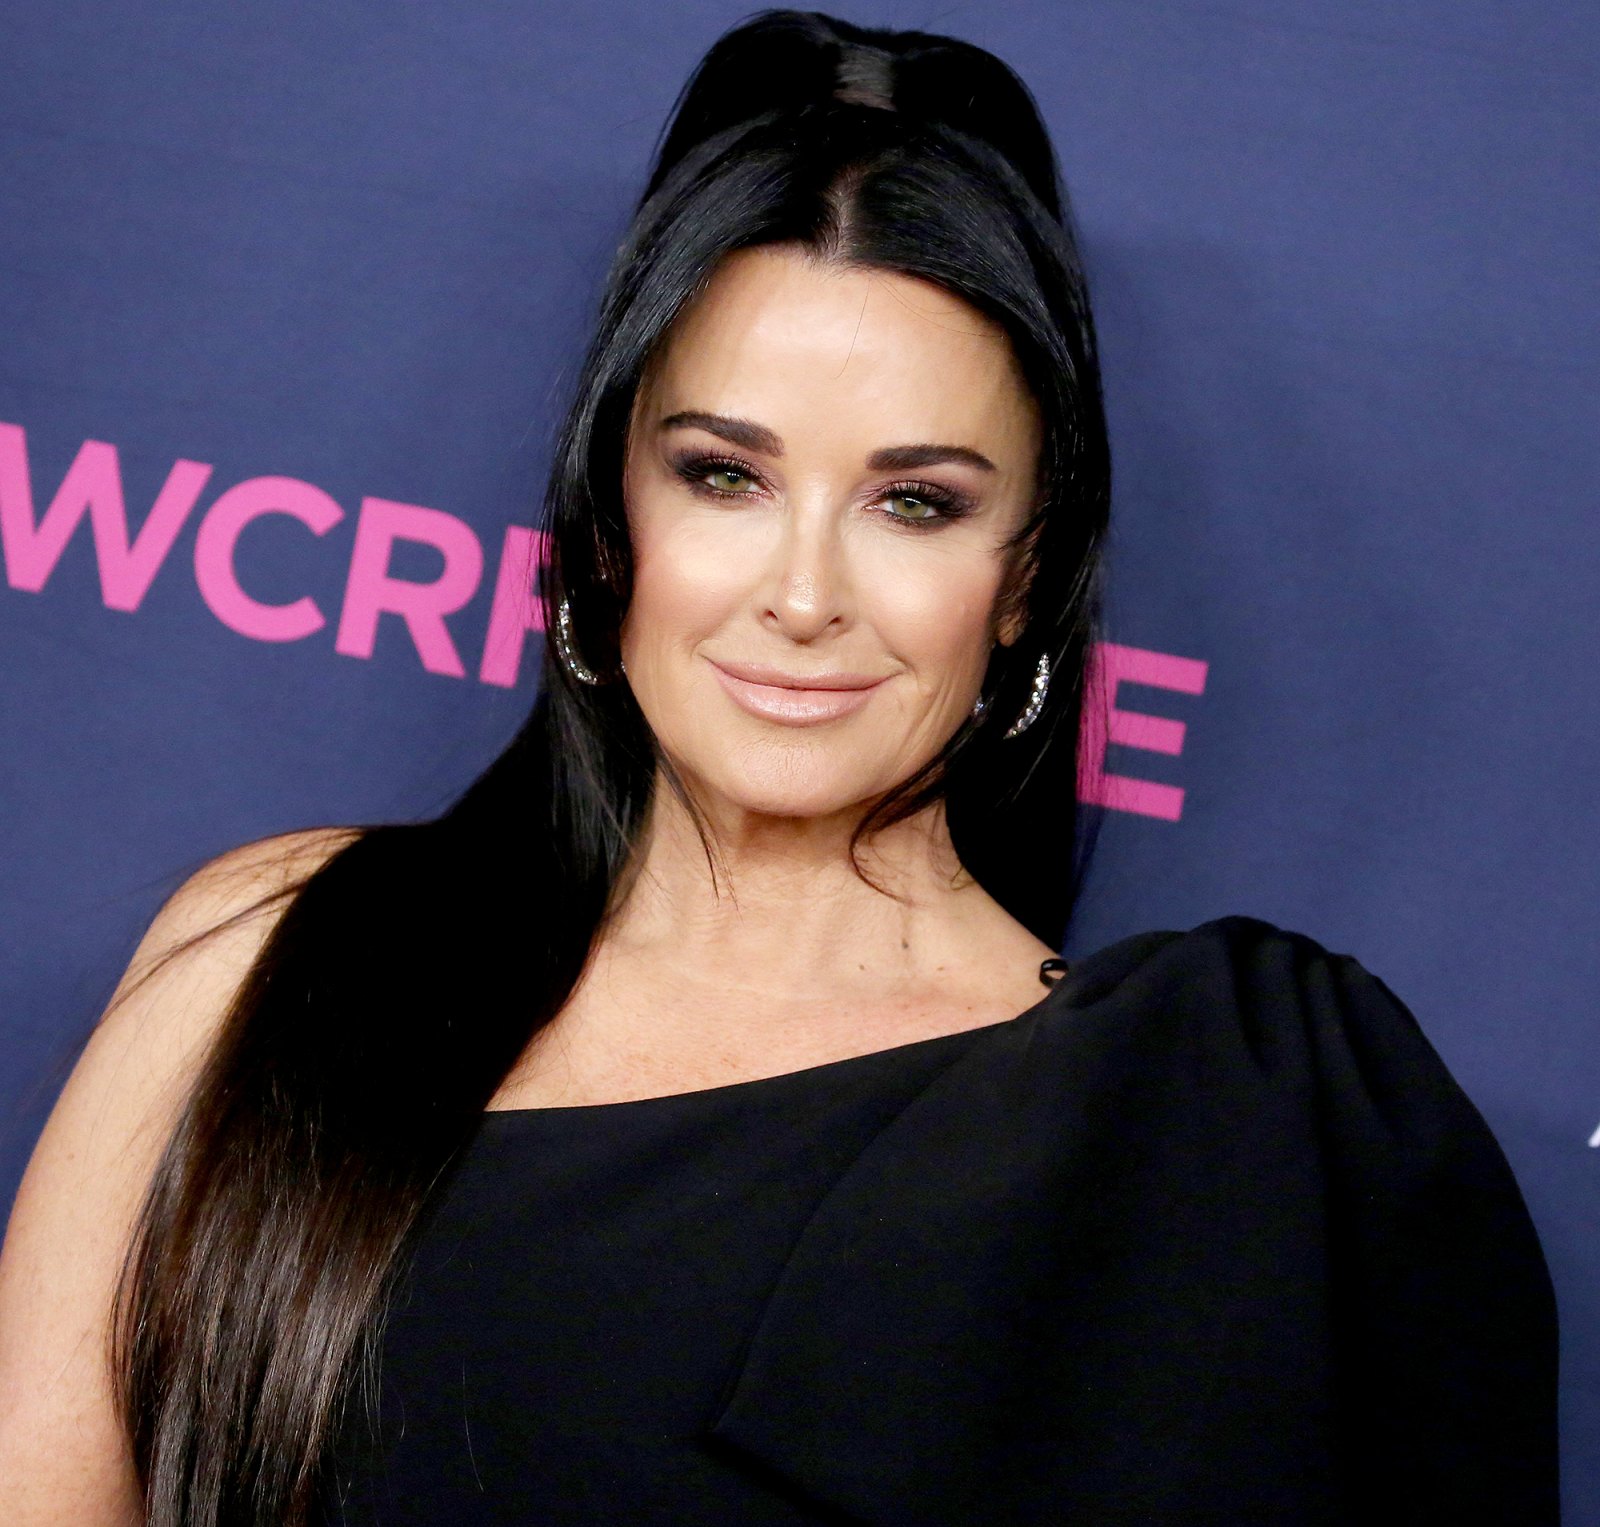 Kyle Richards and RHOBH Stars Reveal If They Believe Denise Richards or Brandi Glanville Amid Affair Accusations 1